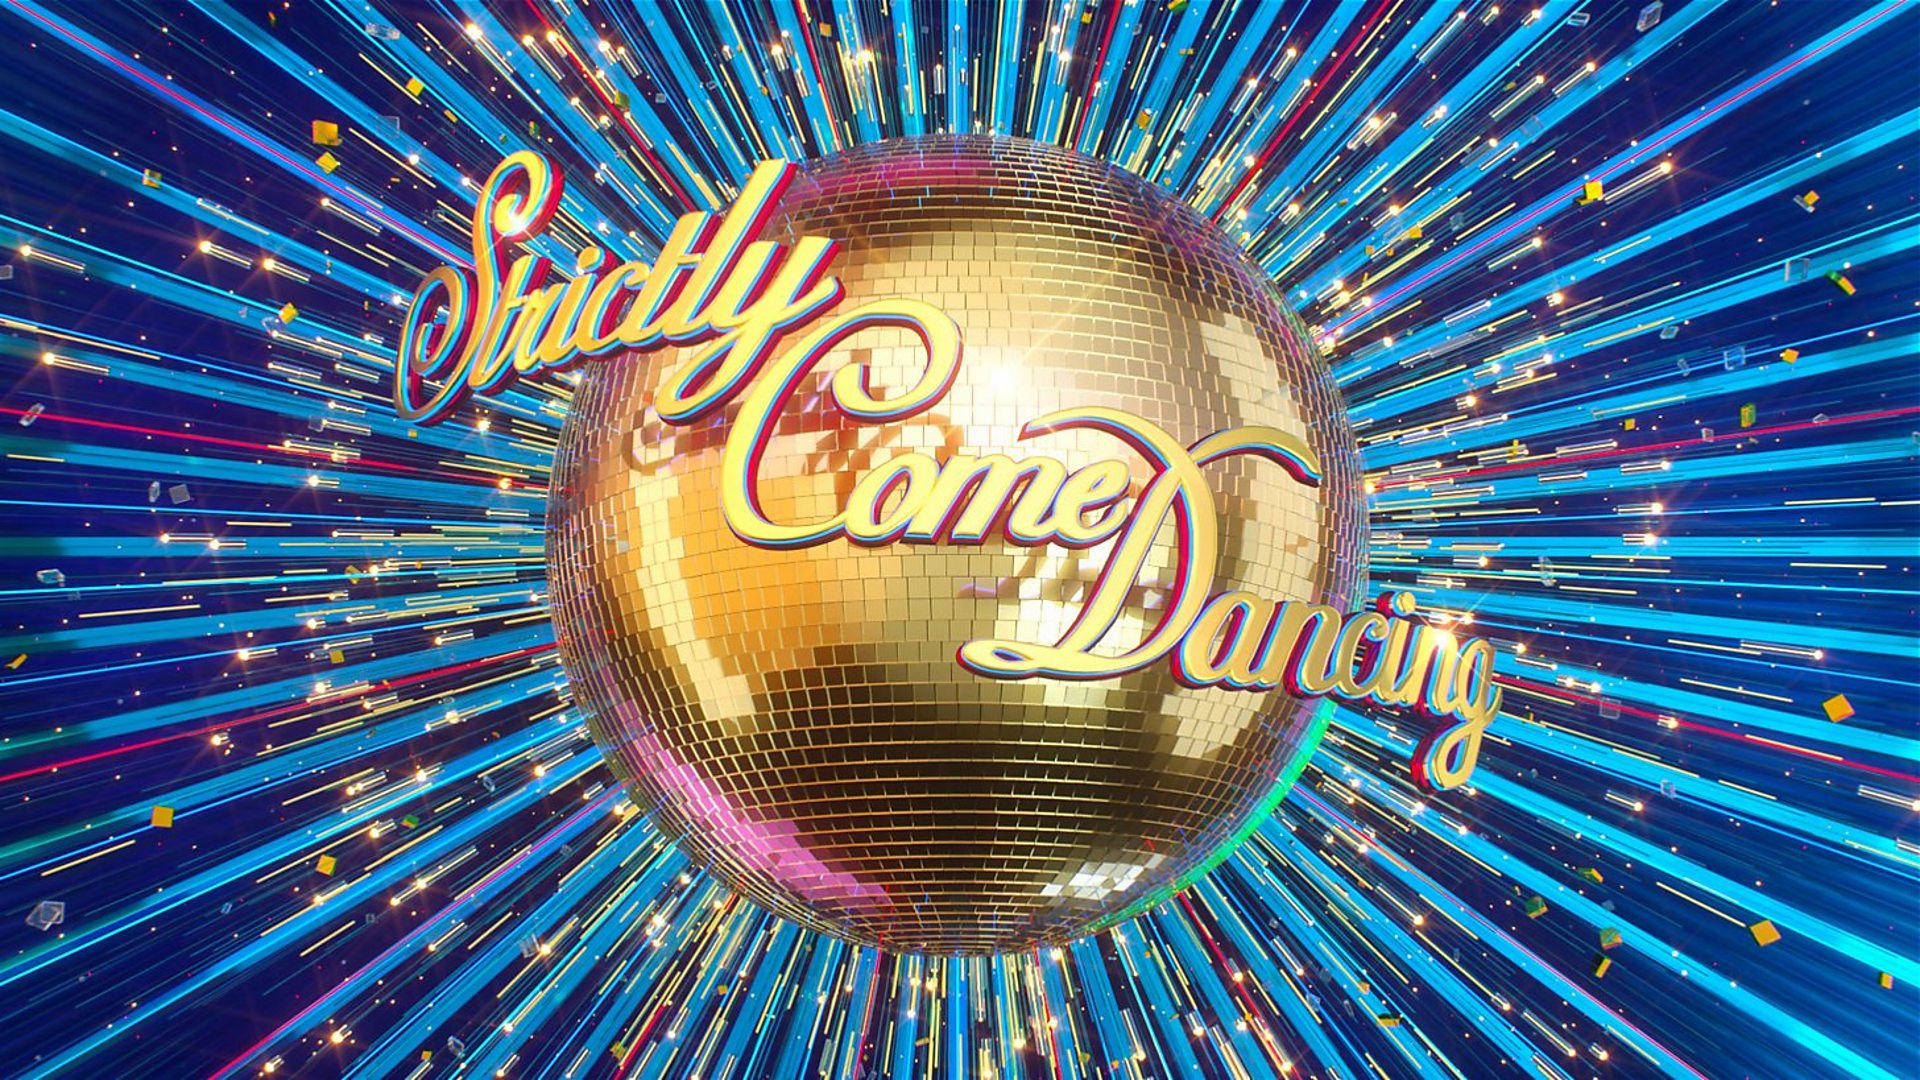 Professional dancers returning for Strictly Come Dancing Series 20